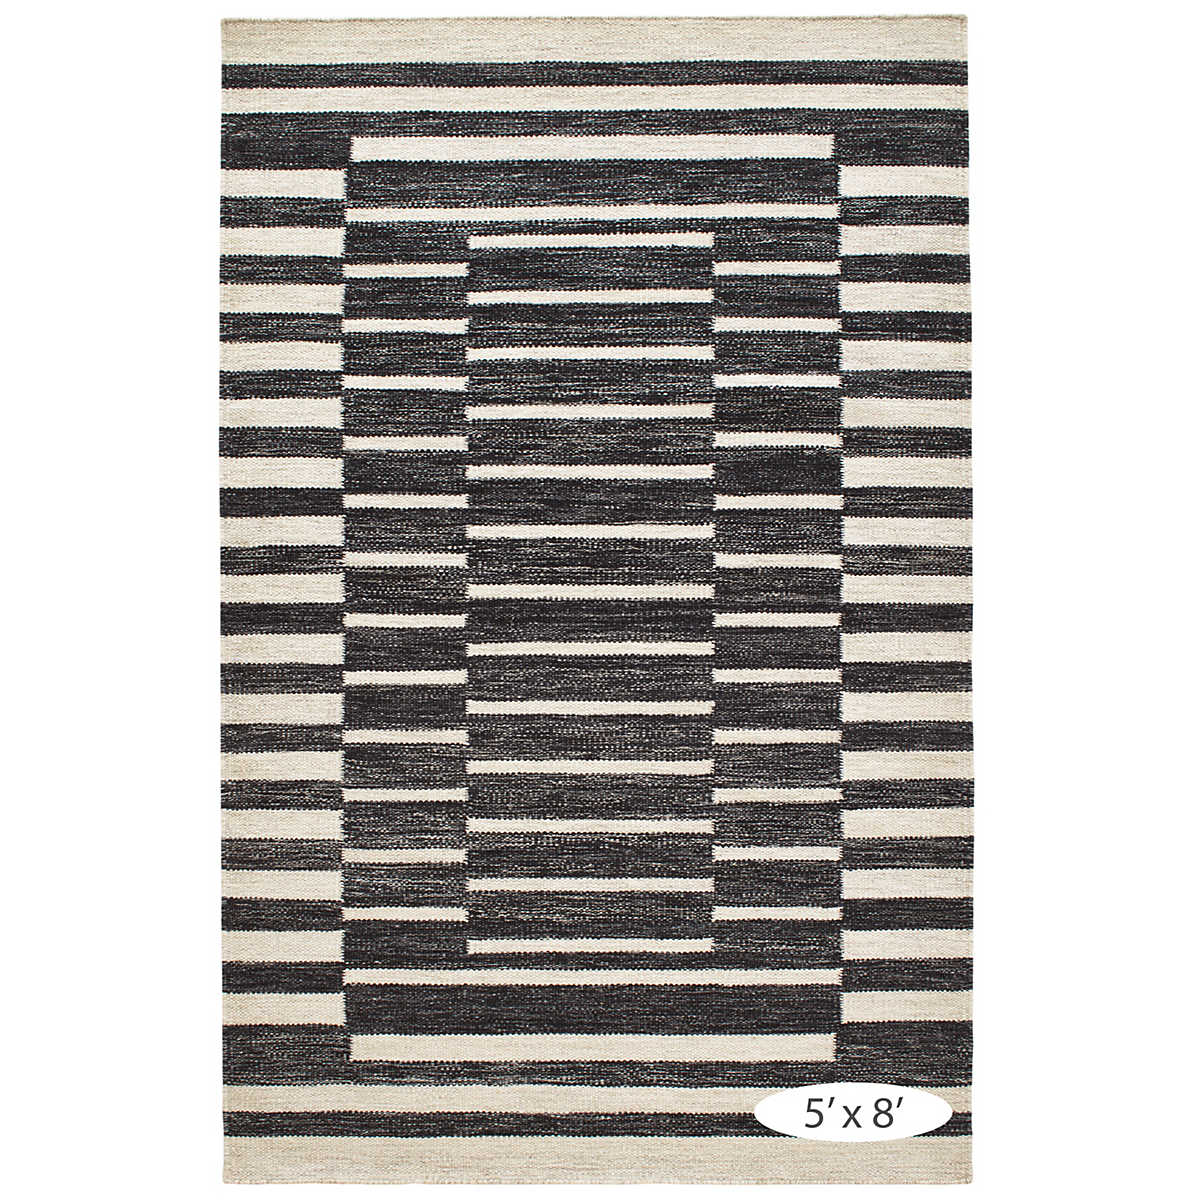 The Heights Charcoal Rug creates the illusion of layers with this gorgeous chunky, flatwoven wool rug. Concentric rectangles of offset ladder stripes make a bold graphic statement. Hand-loomed by artisans from undyed natural fleece wool in marled shades of Charcoal and Ivory. Amethyst Home provides interior design services, furniture, rugs, and lighting in the Miami metro area.